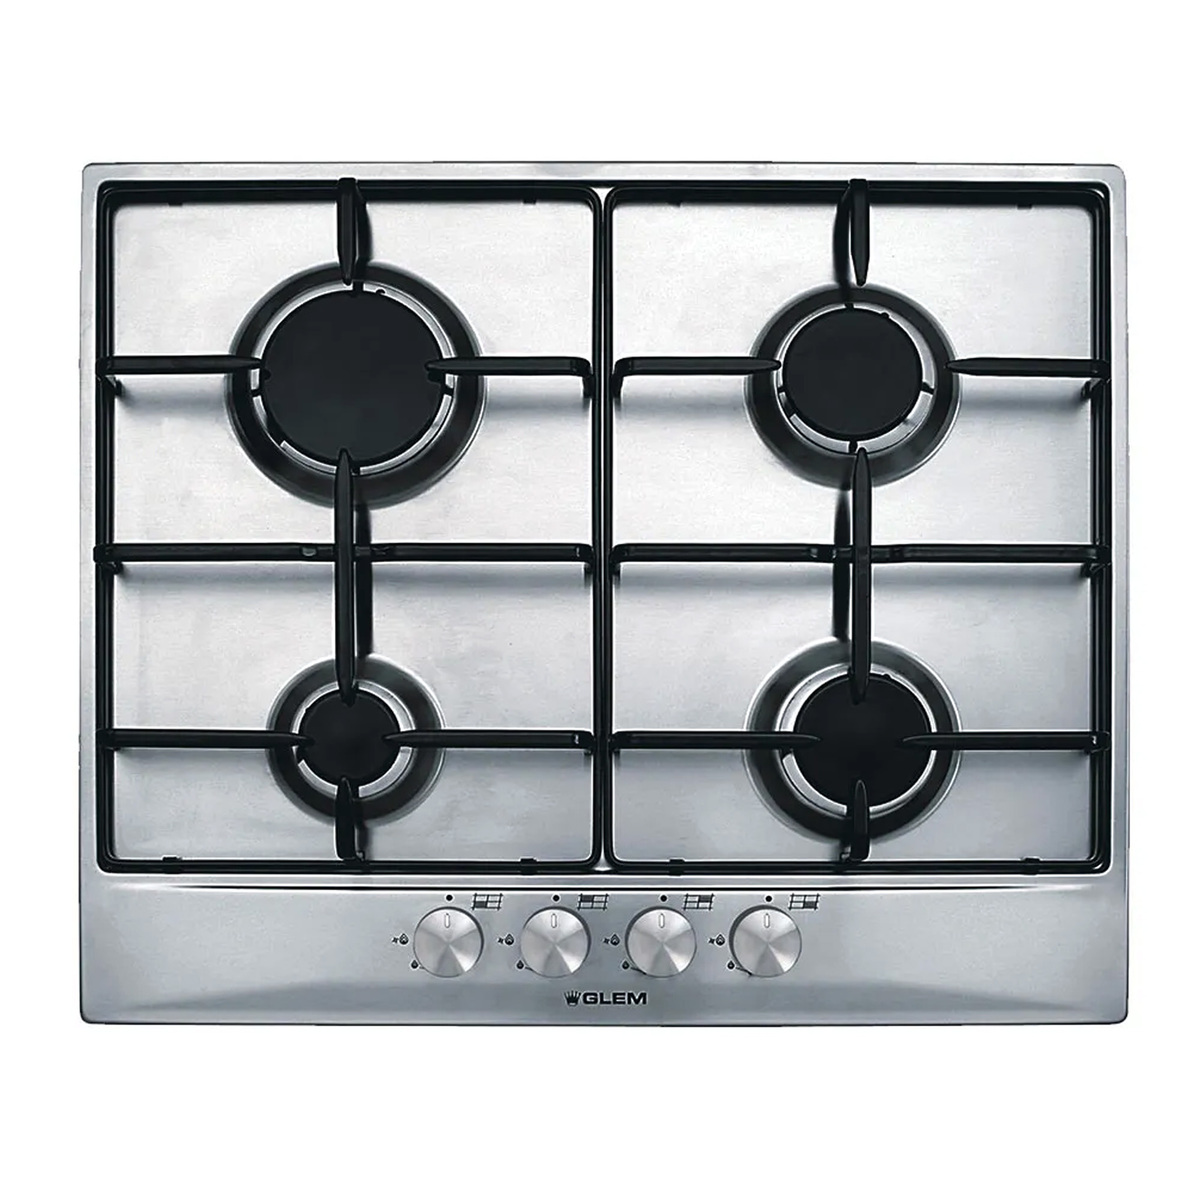 Glemgas Built-in Cooking Hob, 4 Gas Burners, 60 cm, Stainless Steel, GT64IX